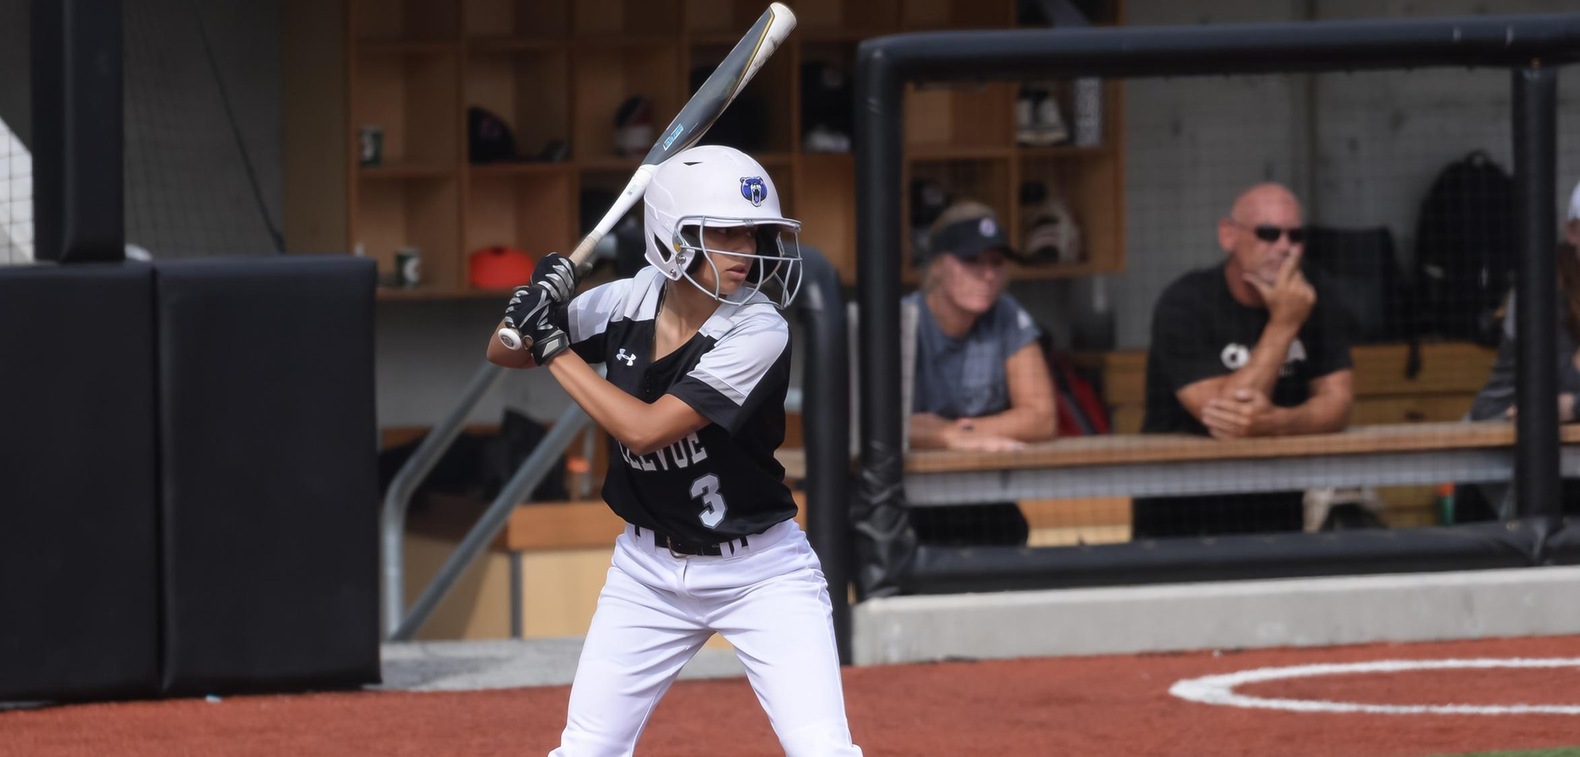 Mya Montero went 2-for-5 with a double and two RBIs on the day.